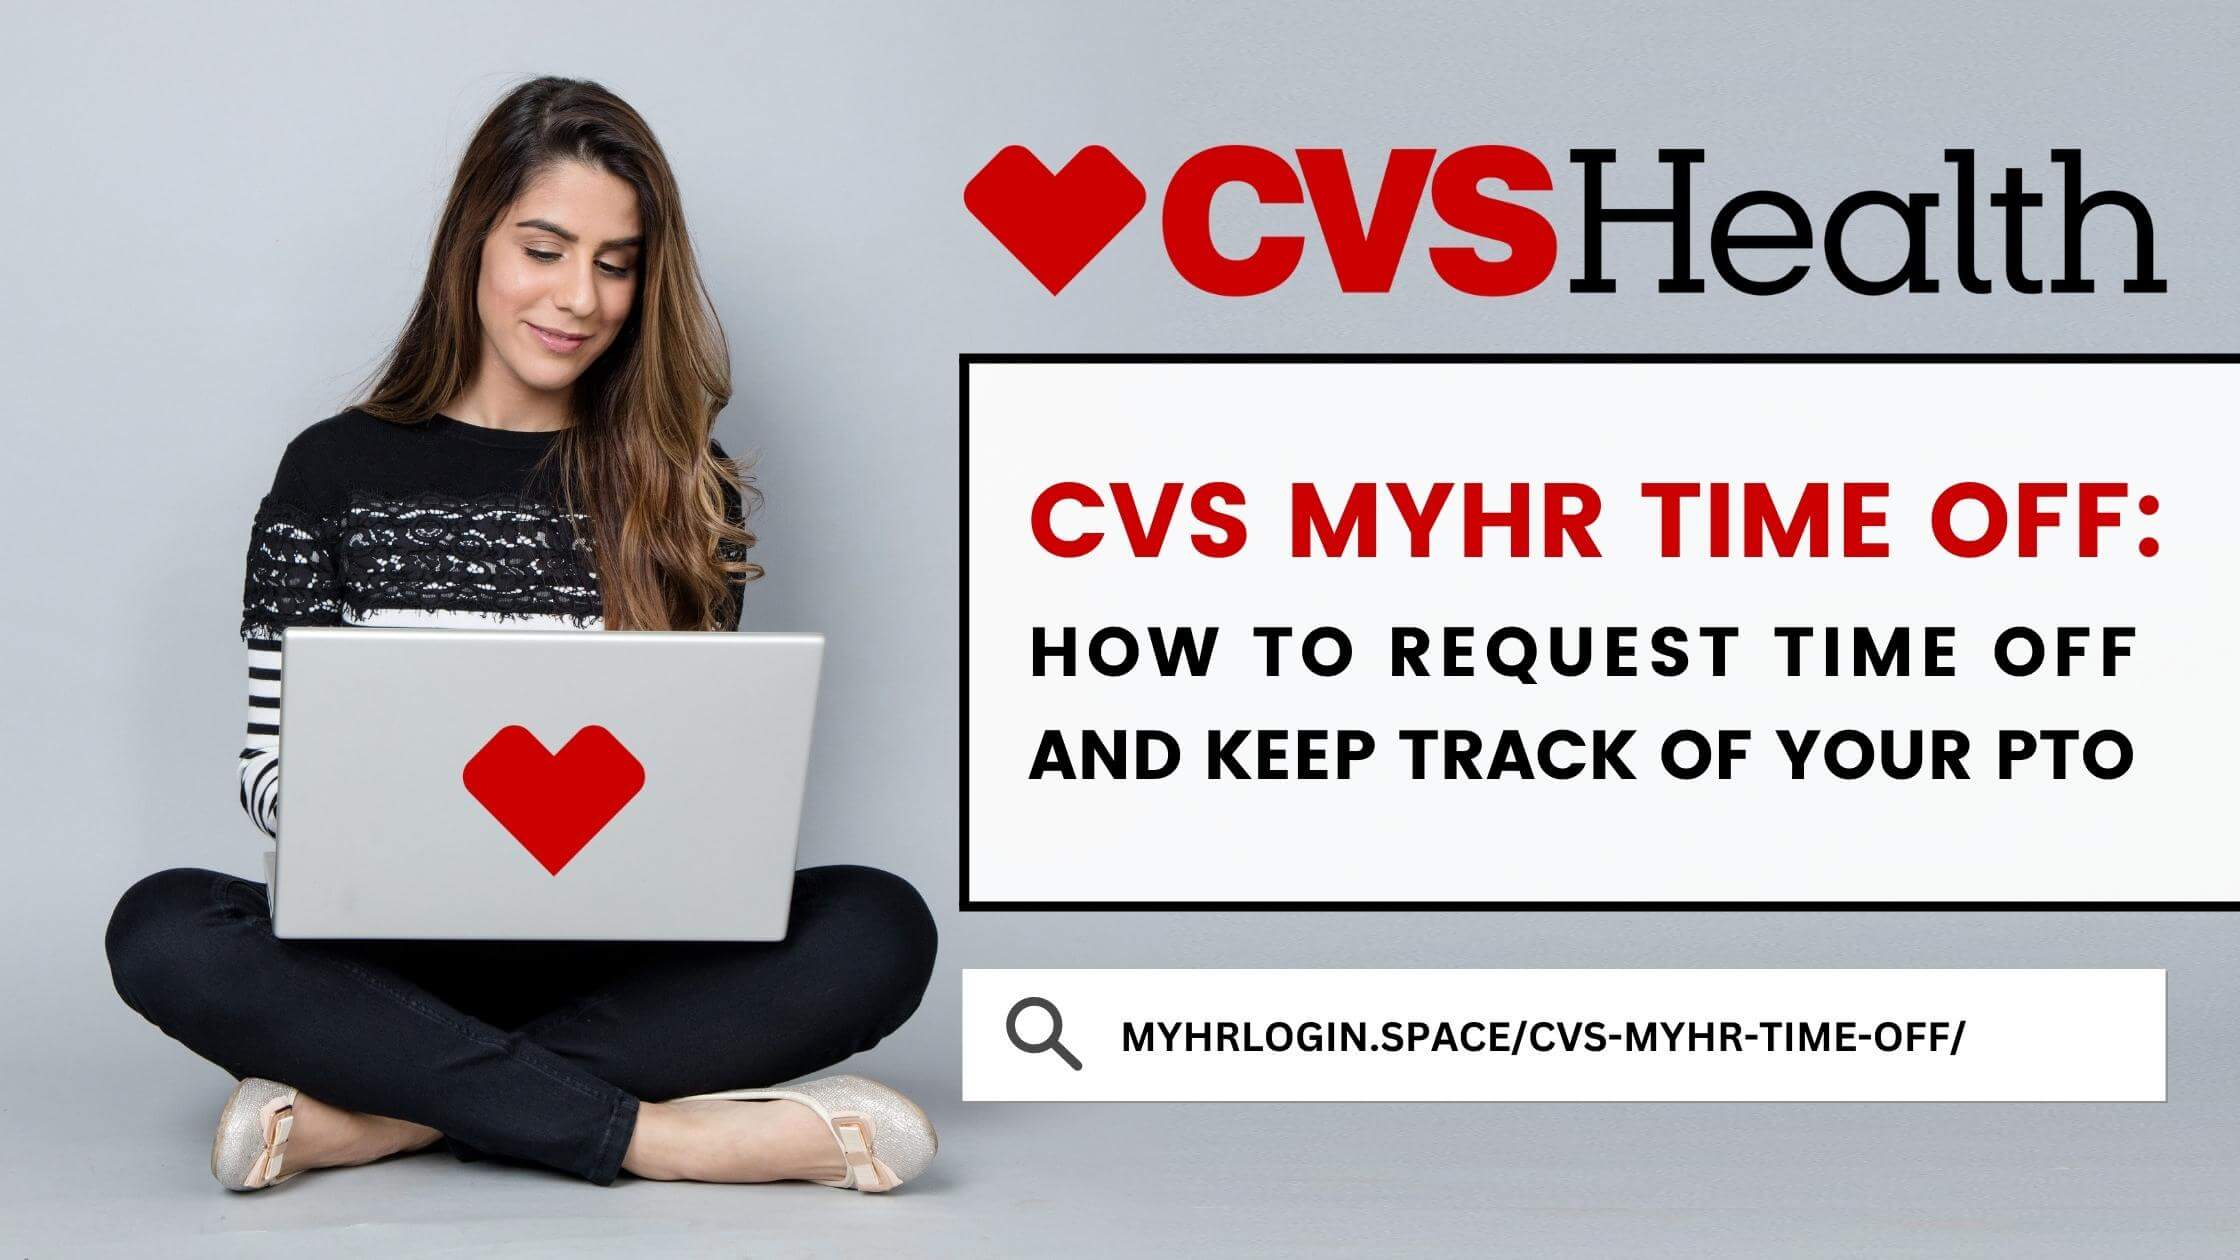 CVS MyHR Time Off: How to Request Time Off and Keep Track of Your PTO